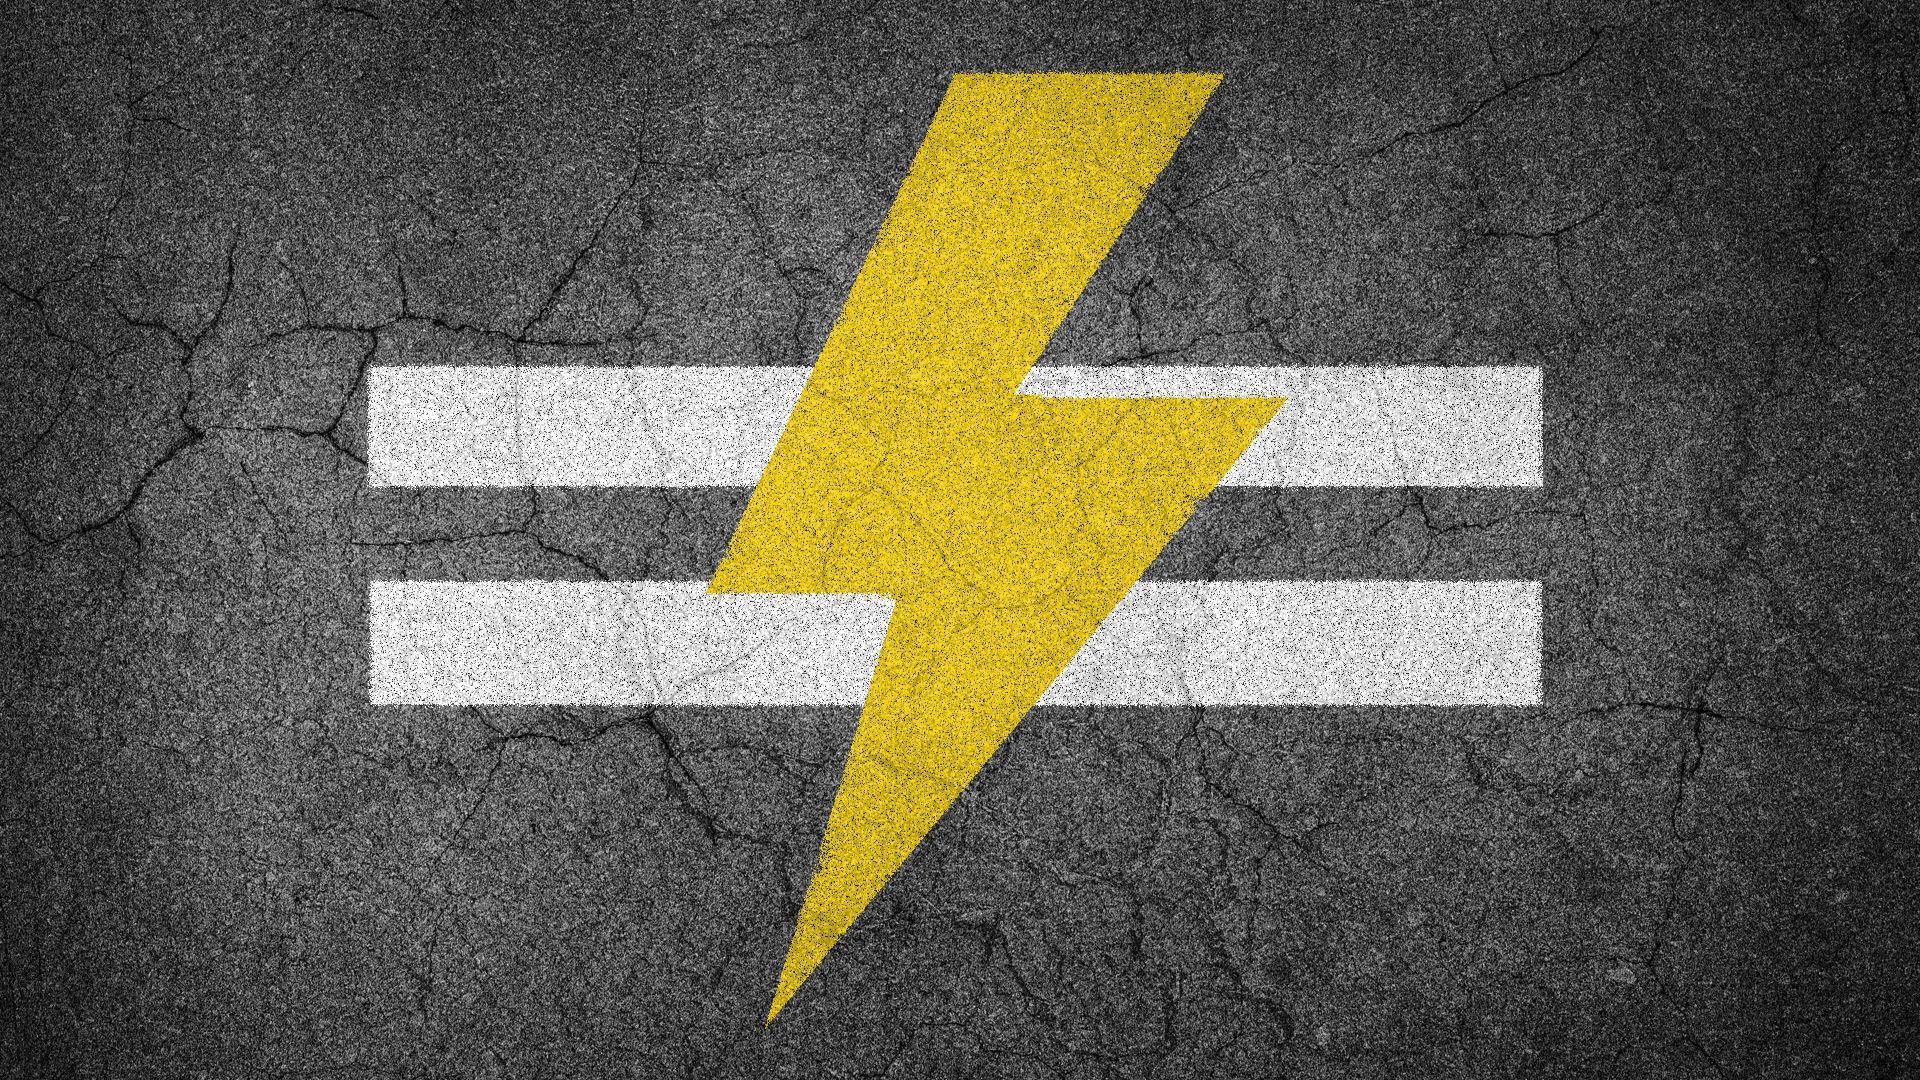 Illustration of an unequal sign with a lightning bolt through it on pavement